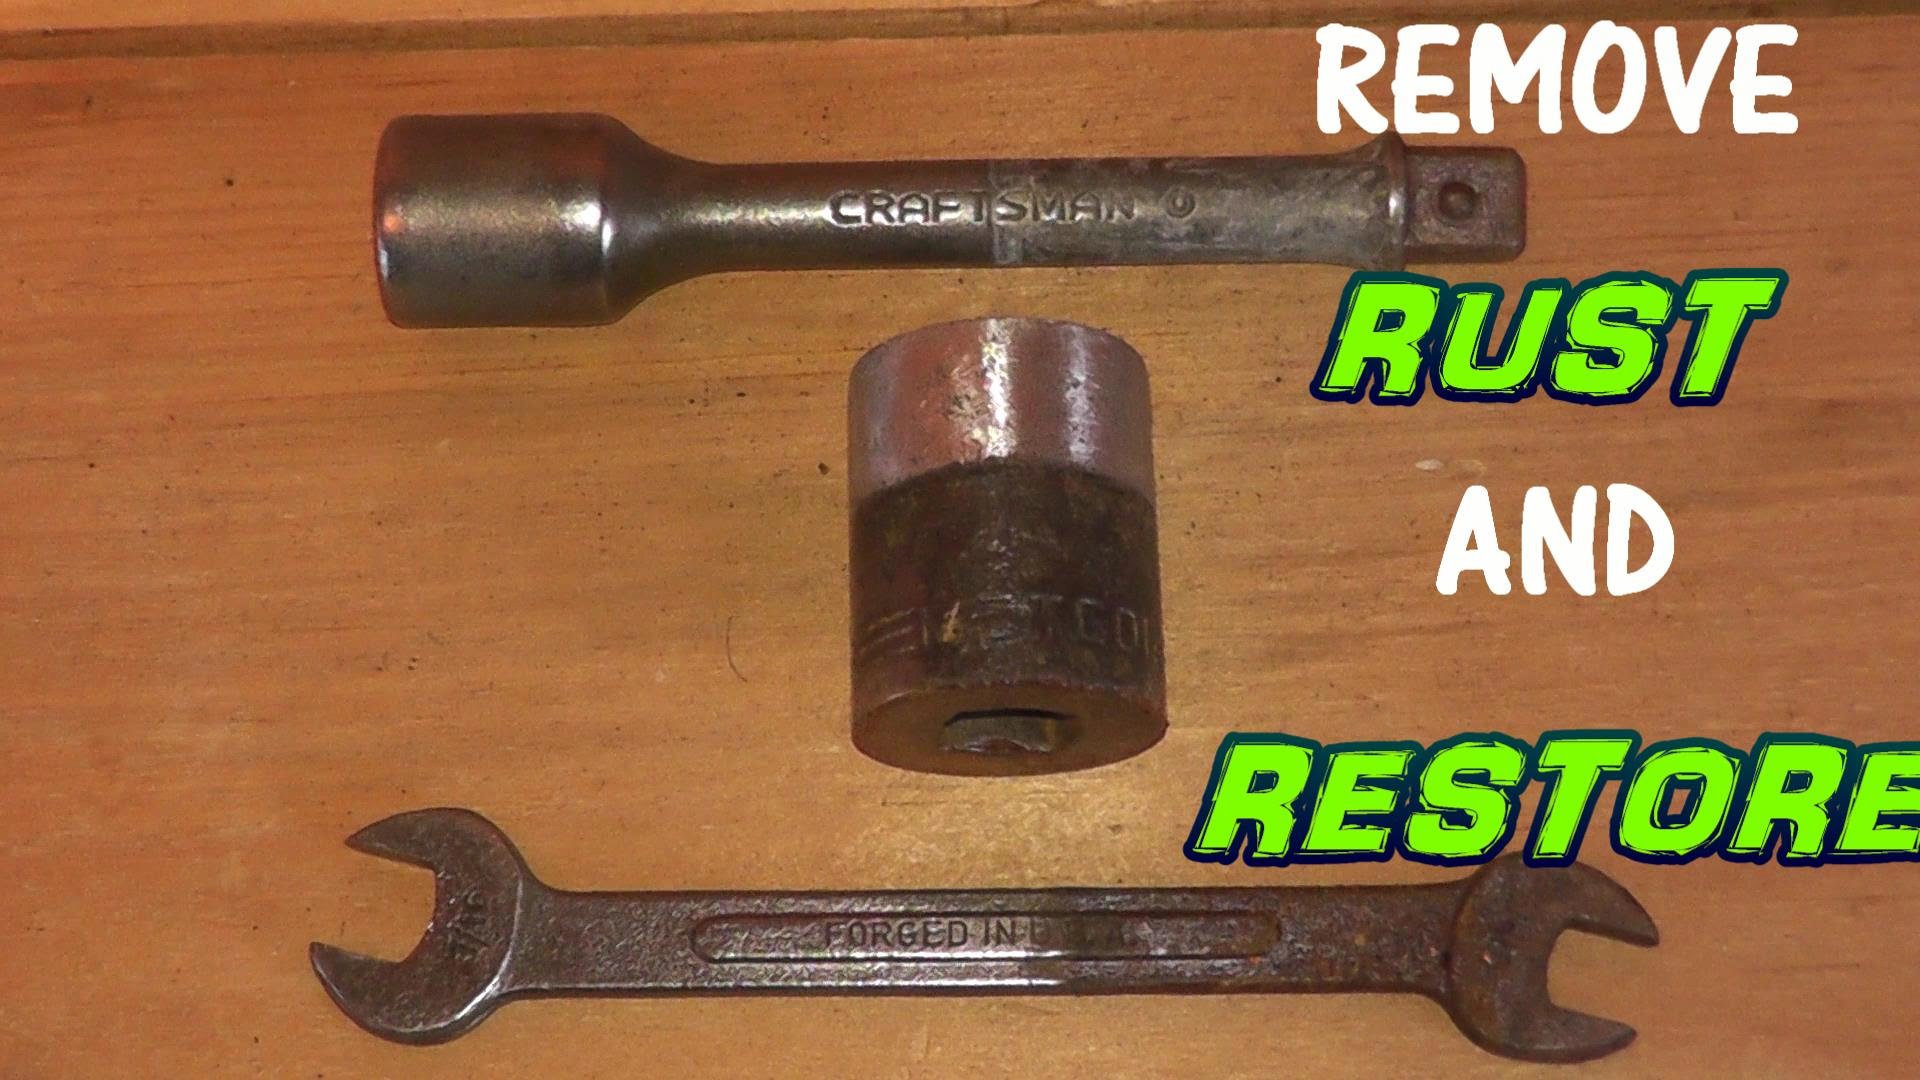 How to Remove Rust from Metal Tools - YouTube